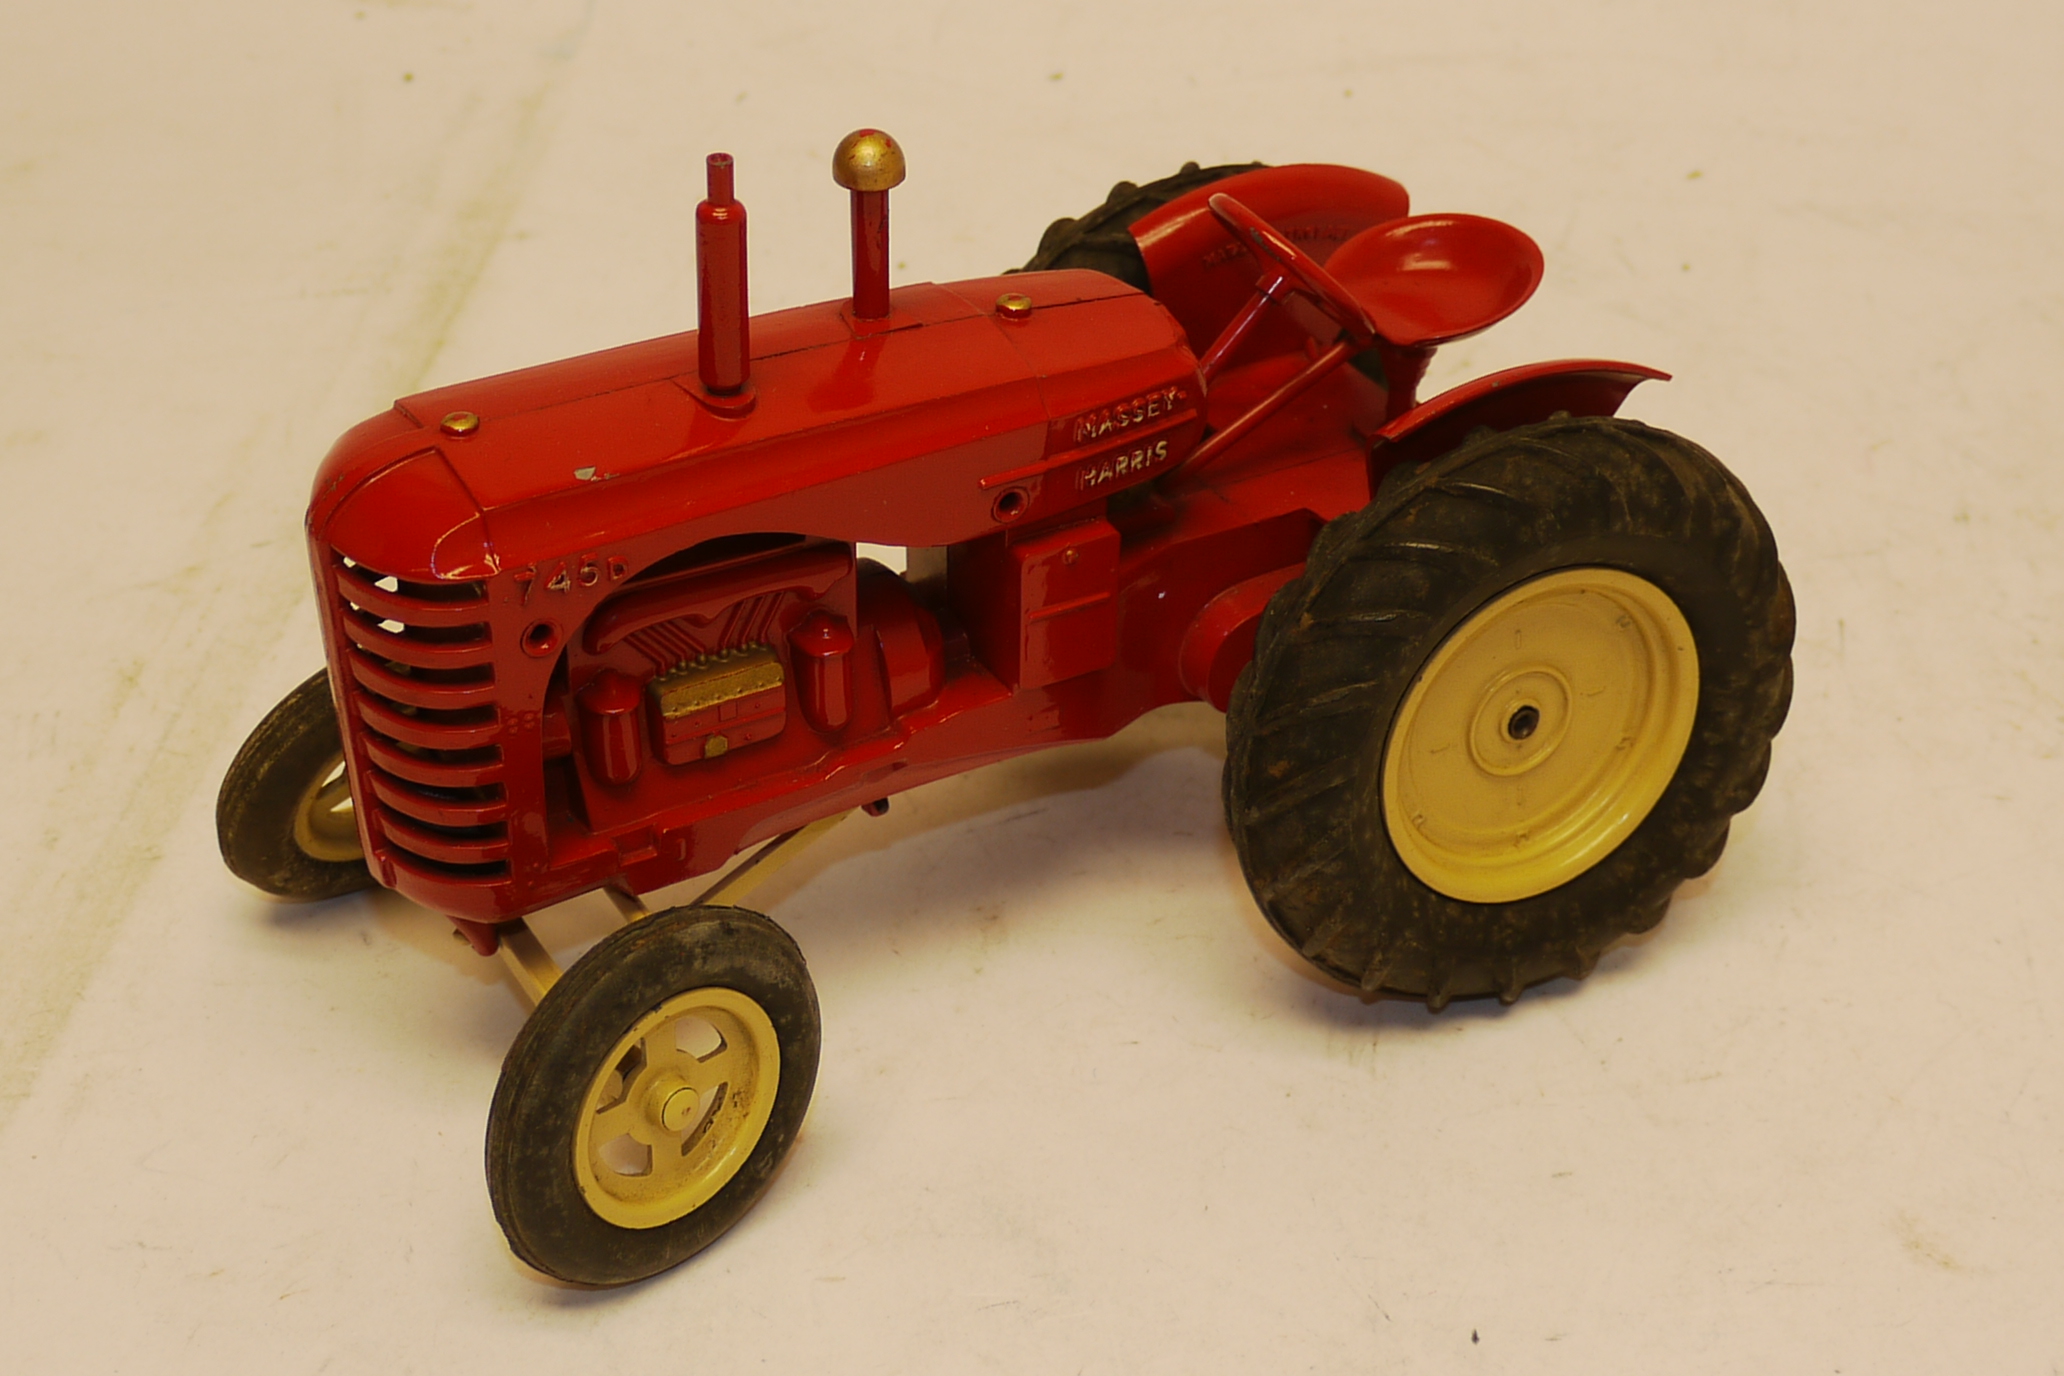 Moko Lesney Tractor, A Moko Lesney Massey Harris 745 D tractor in red livery with rubber tyres